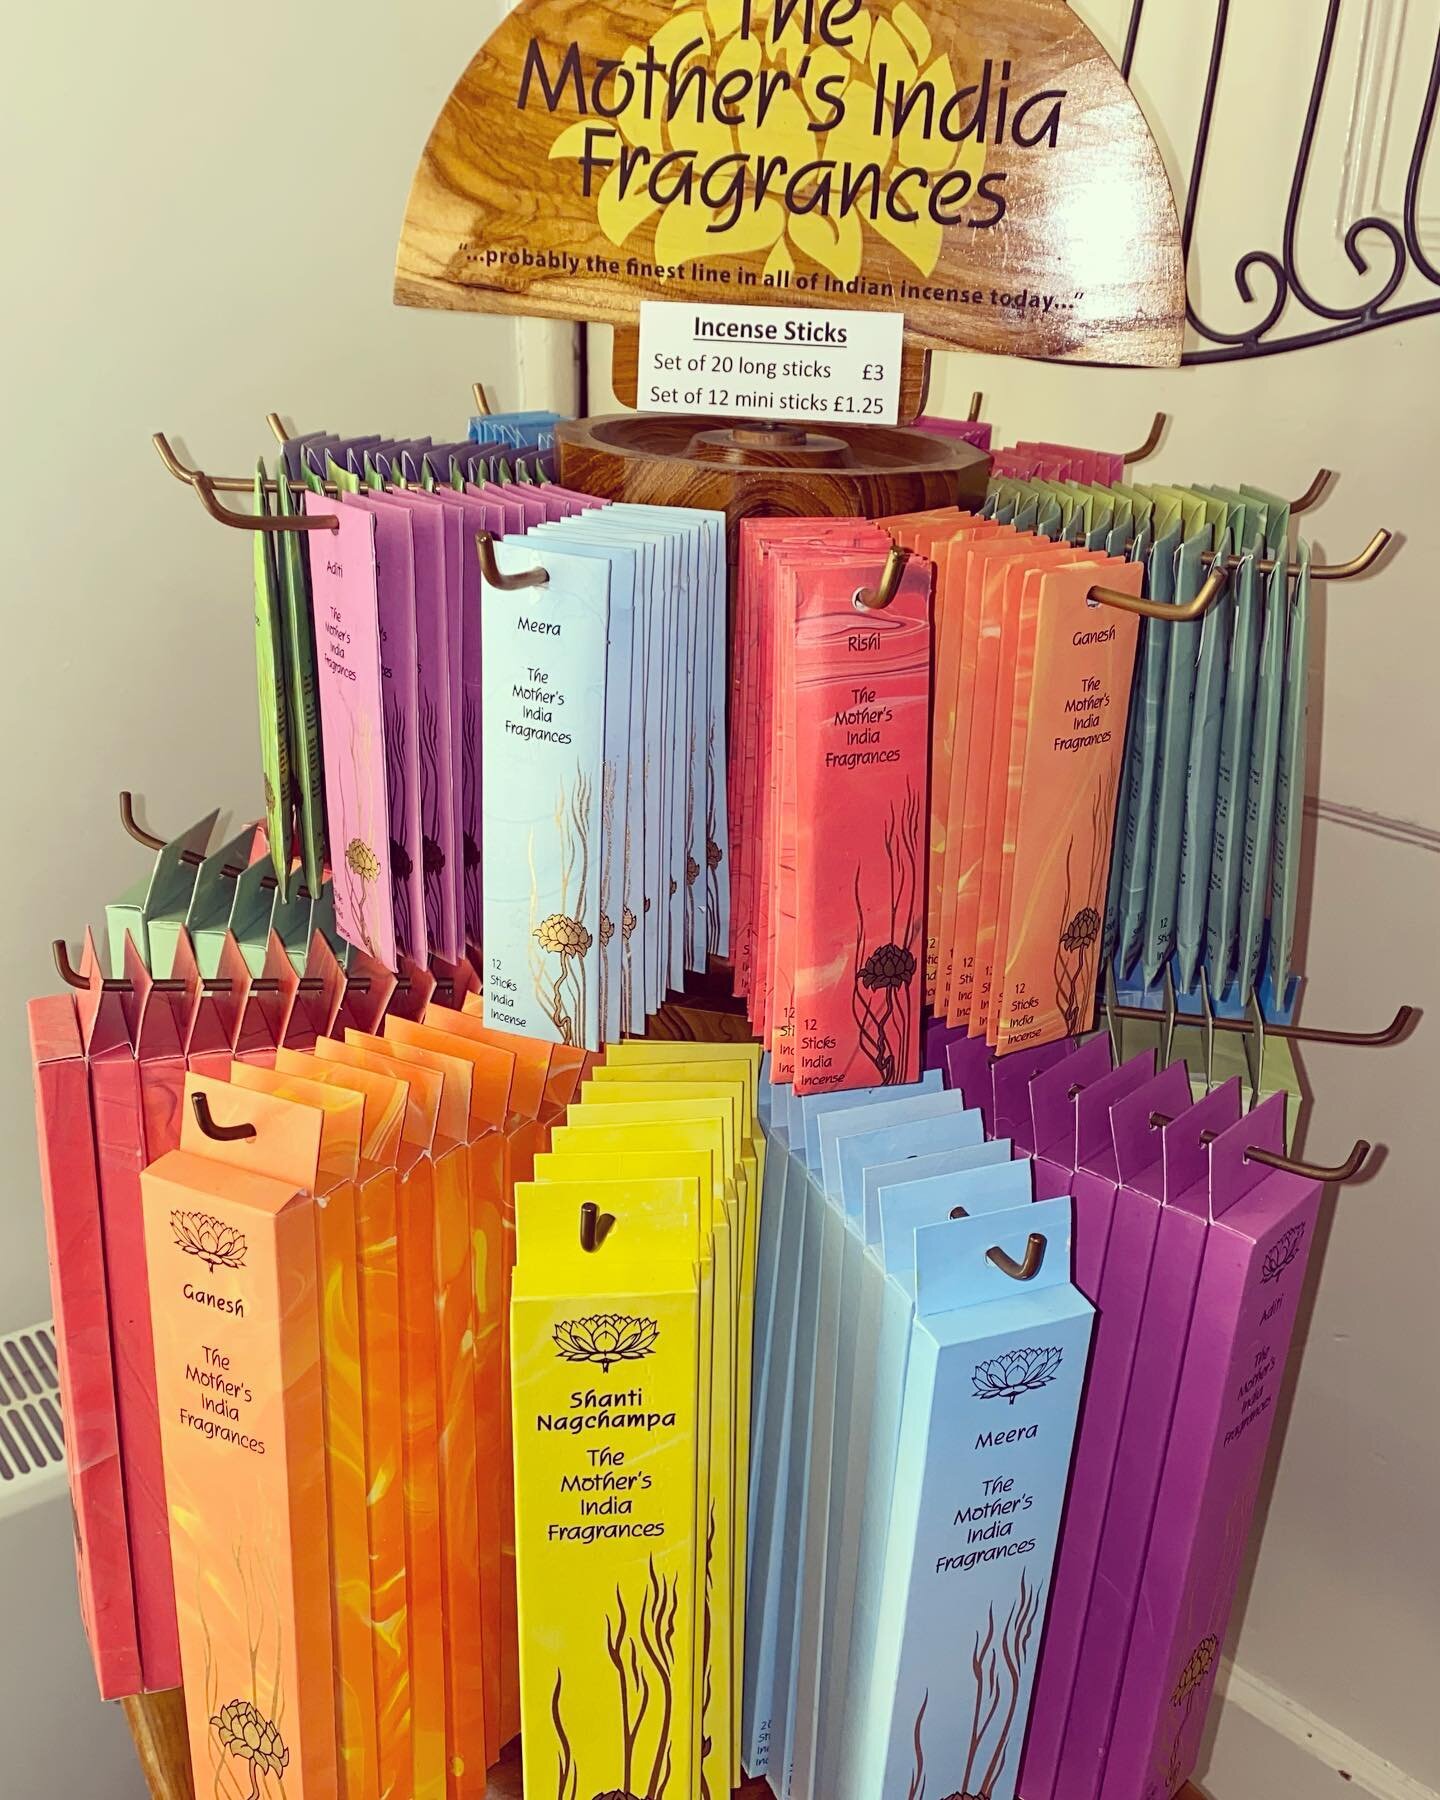 The Mother&rsquo;s India incense sticks are made with only natural ingredients, hand blended and hand rolled from natural resins, pure essential oils, scented flowers, leaves, charcoal and wood powders. No dipping!

This age-old masala method of maki